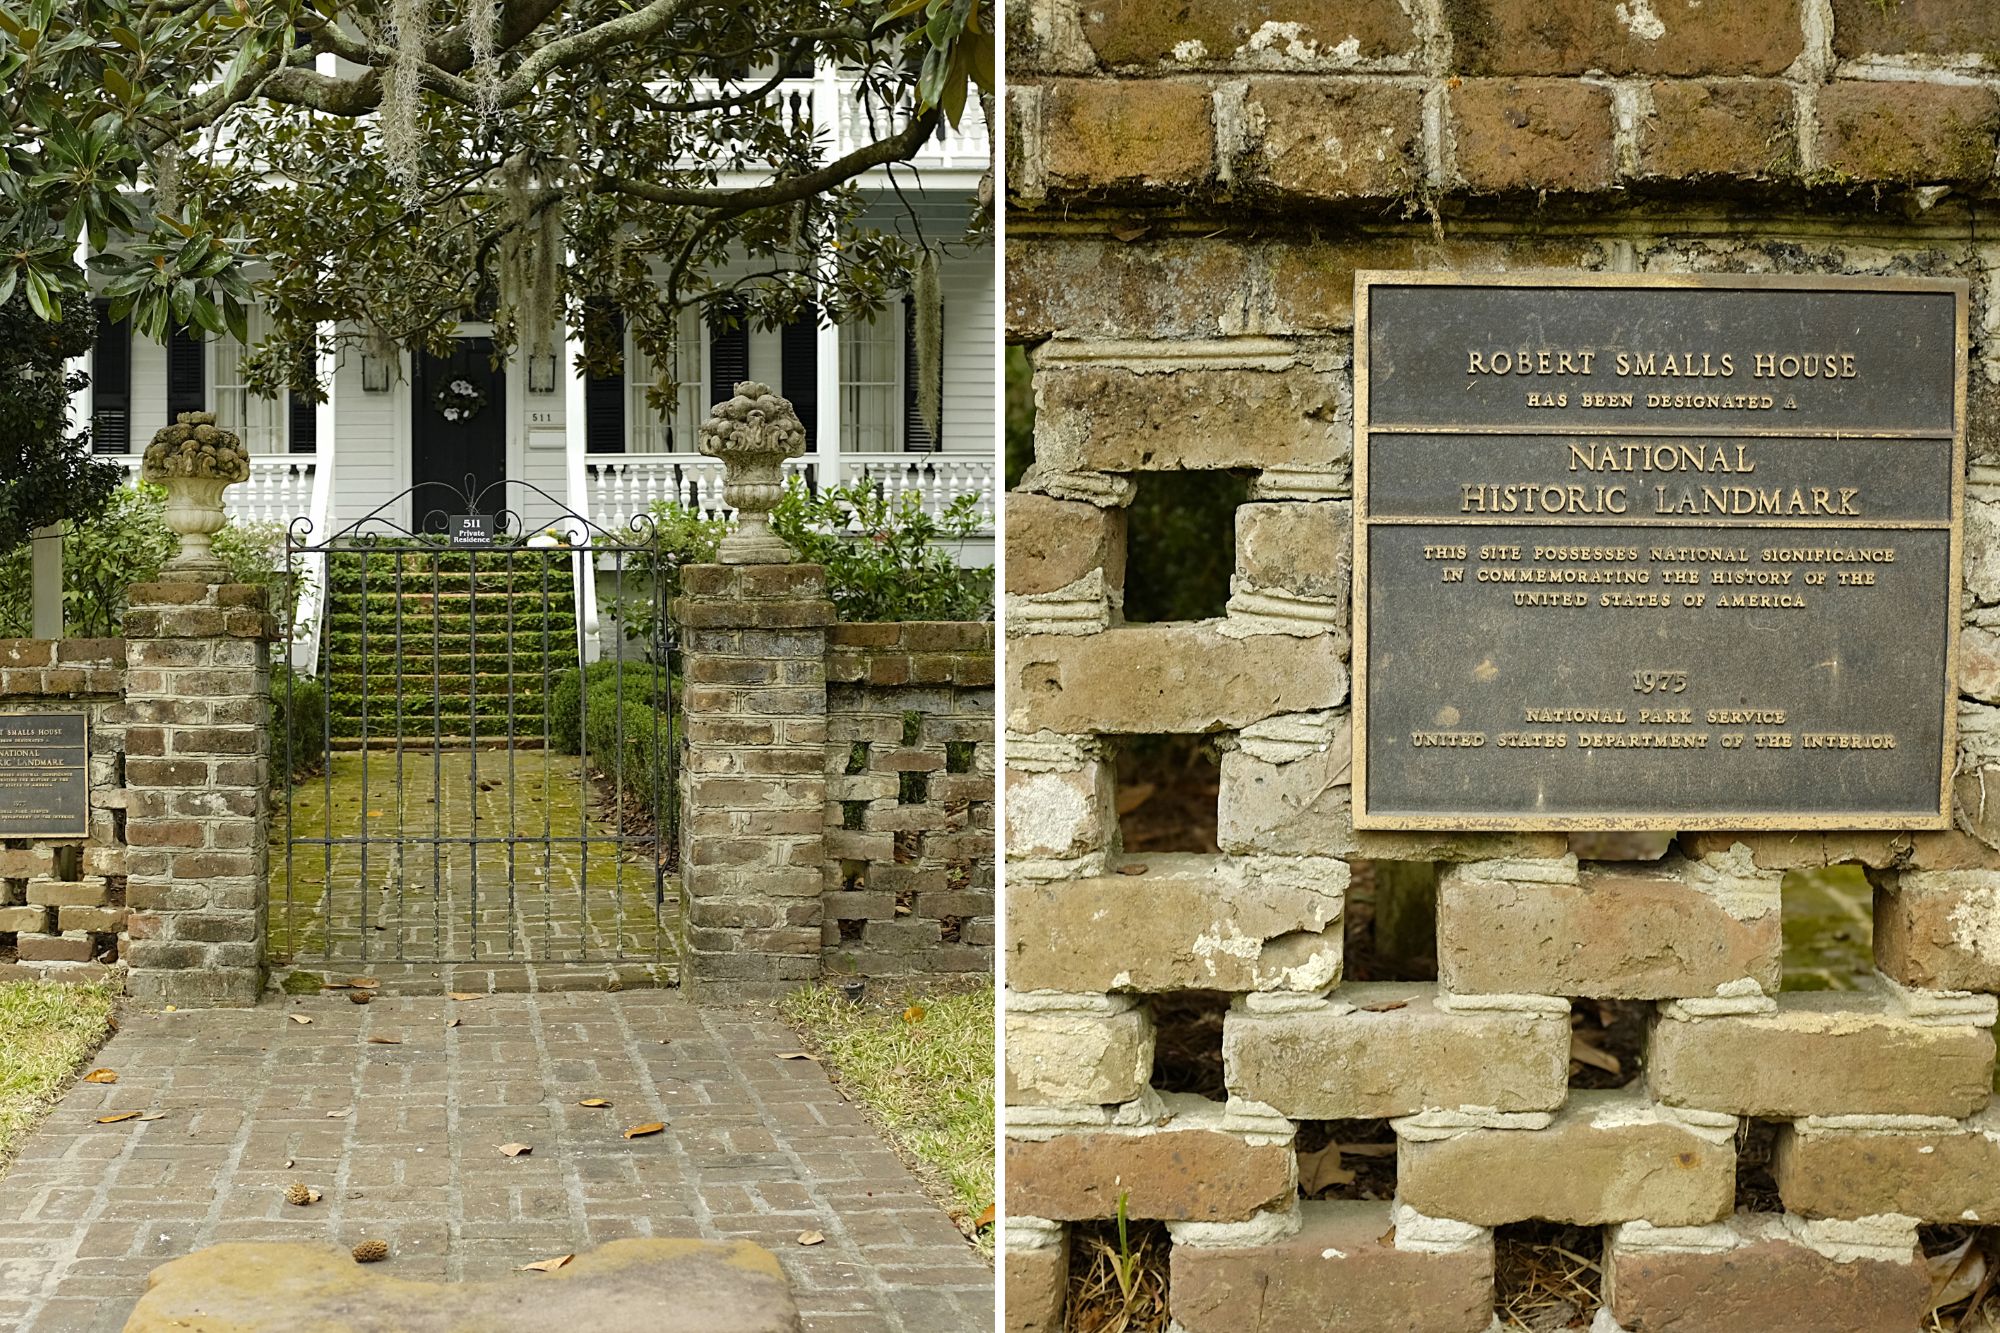 Images of exterior of Robert Smalls House